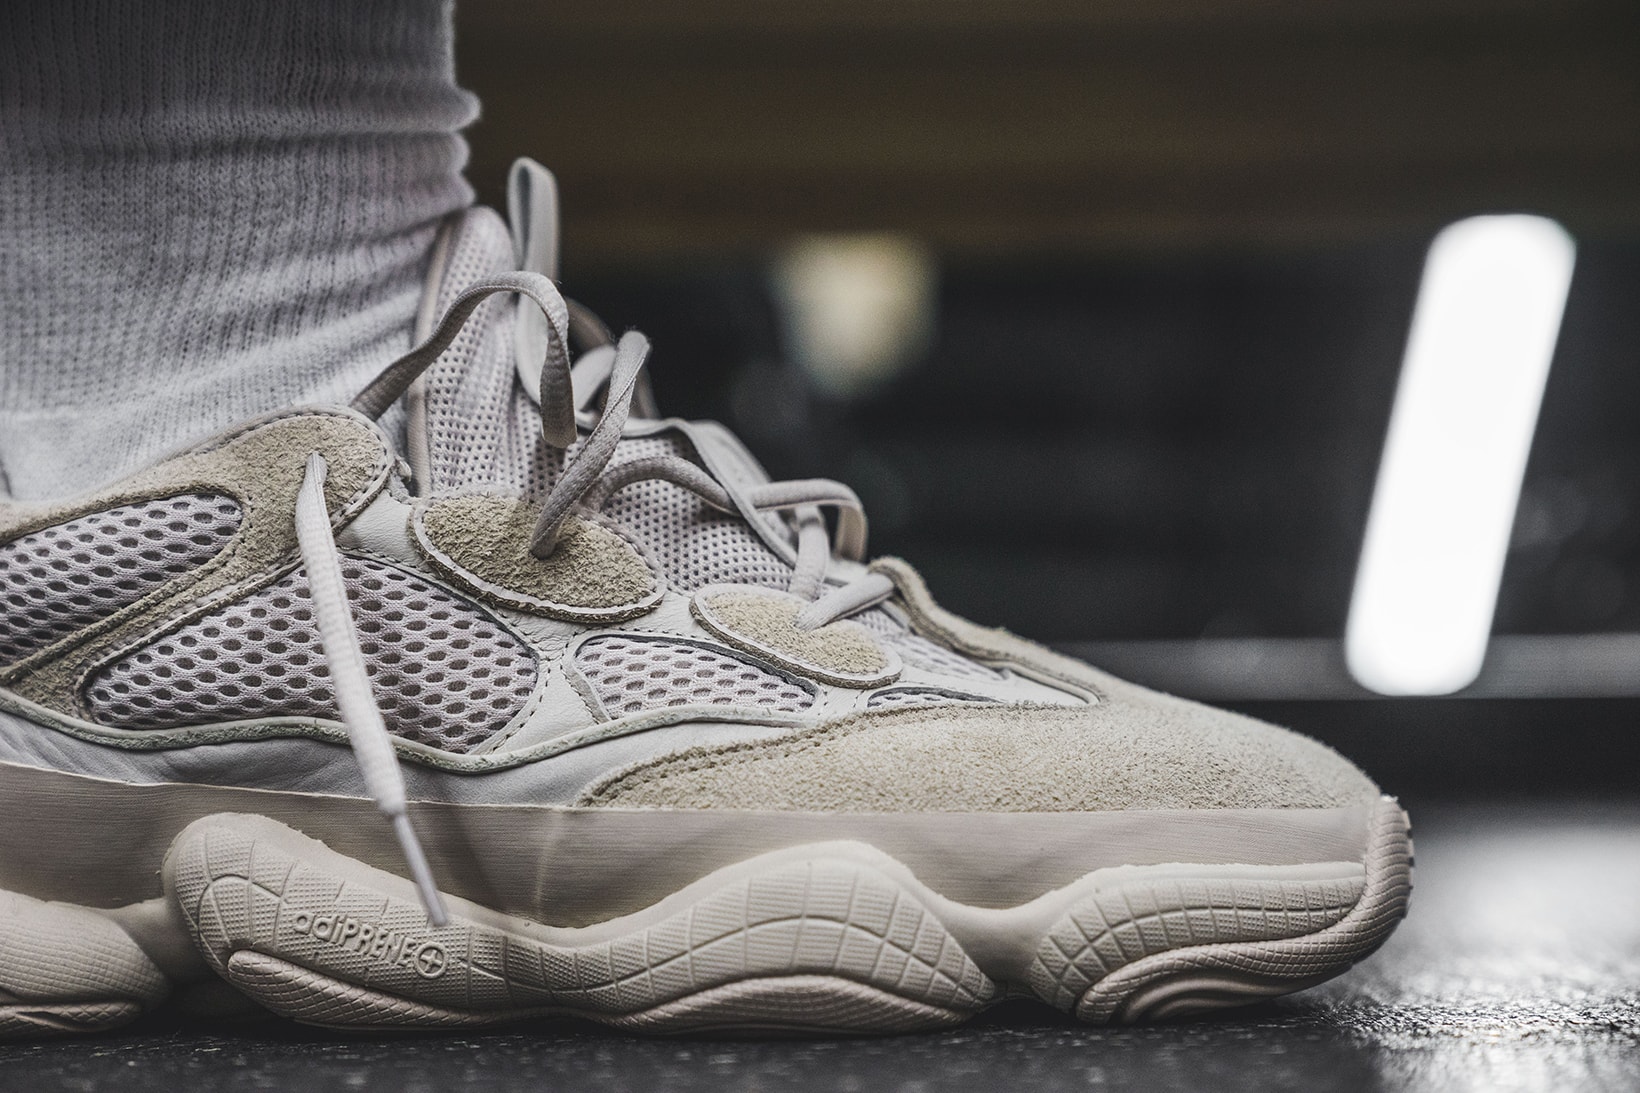 Kanye West Releases Yeezy 500 'Supermoon' Sneaker Campaign On